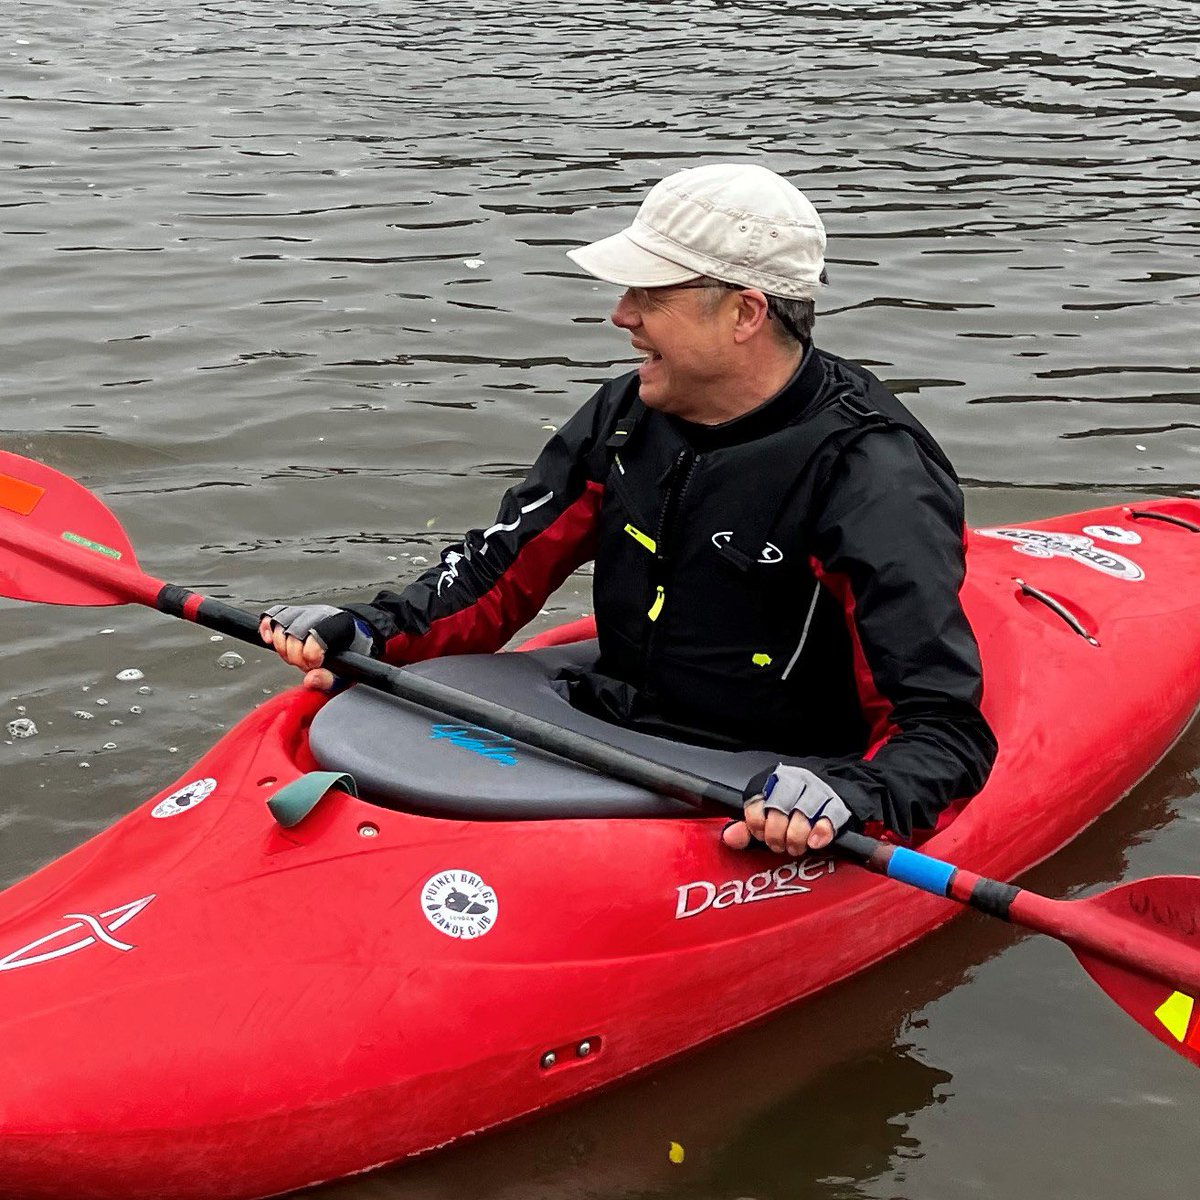 QT with the oldest photo of you on your phone…. Must be around 1980/81 #LeighOnSea - hadn’t quite got the hang of the kayak thing (vs.2023 #Thames)